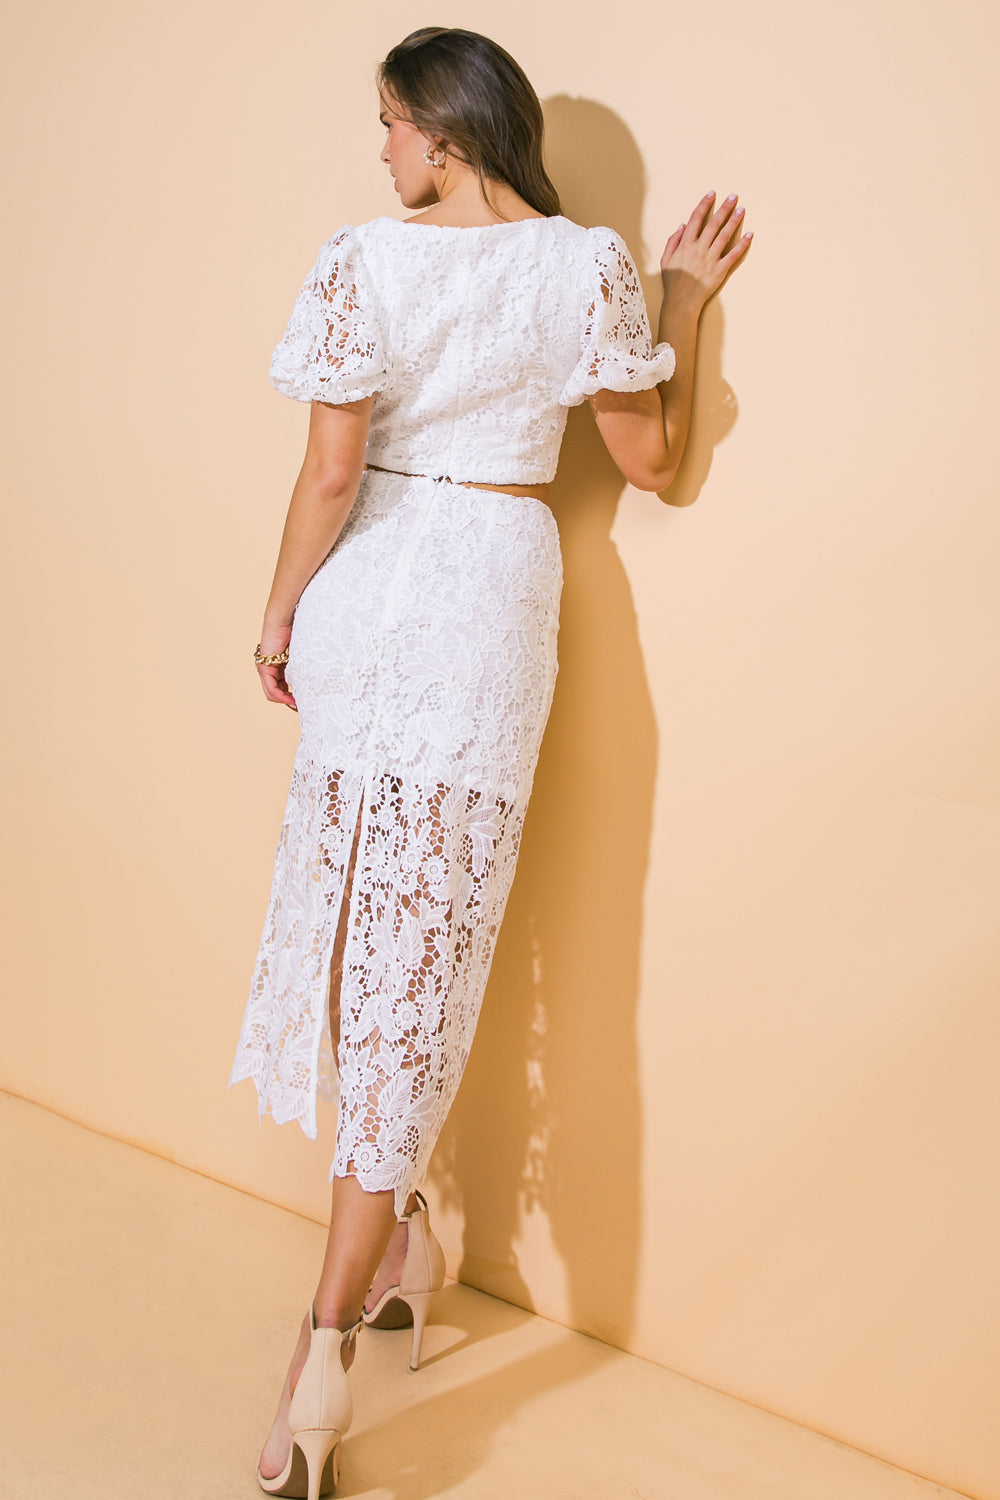 UNFORGETTABLE ICON WOVEN LACE TOP AND SKIRT